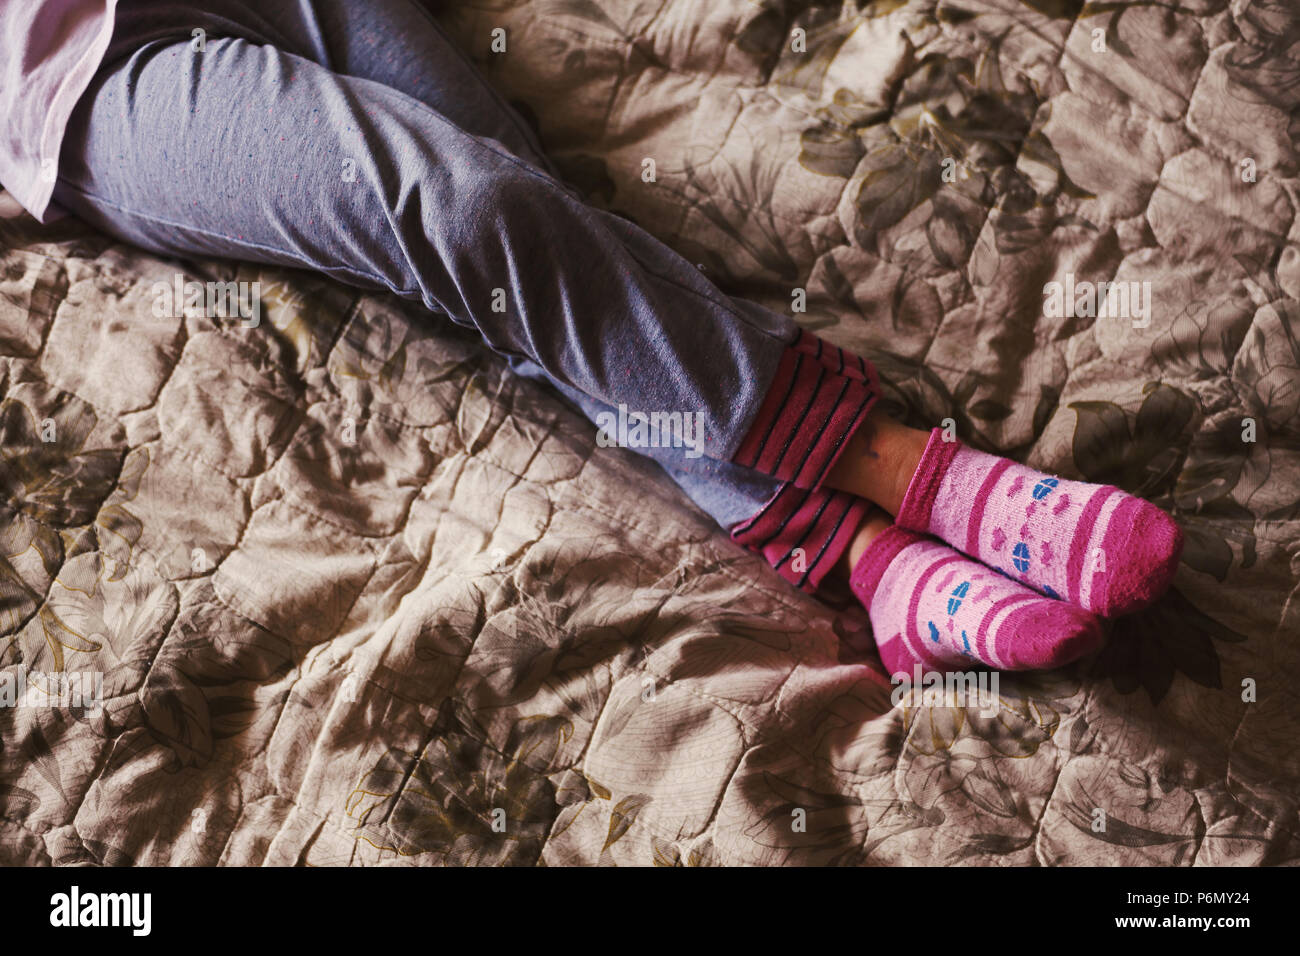 Legs of a small girl resting on bed. Stock Photo